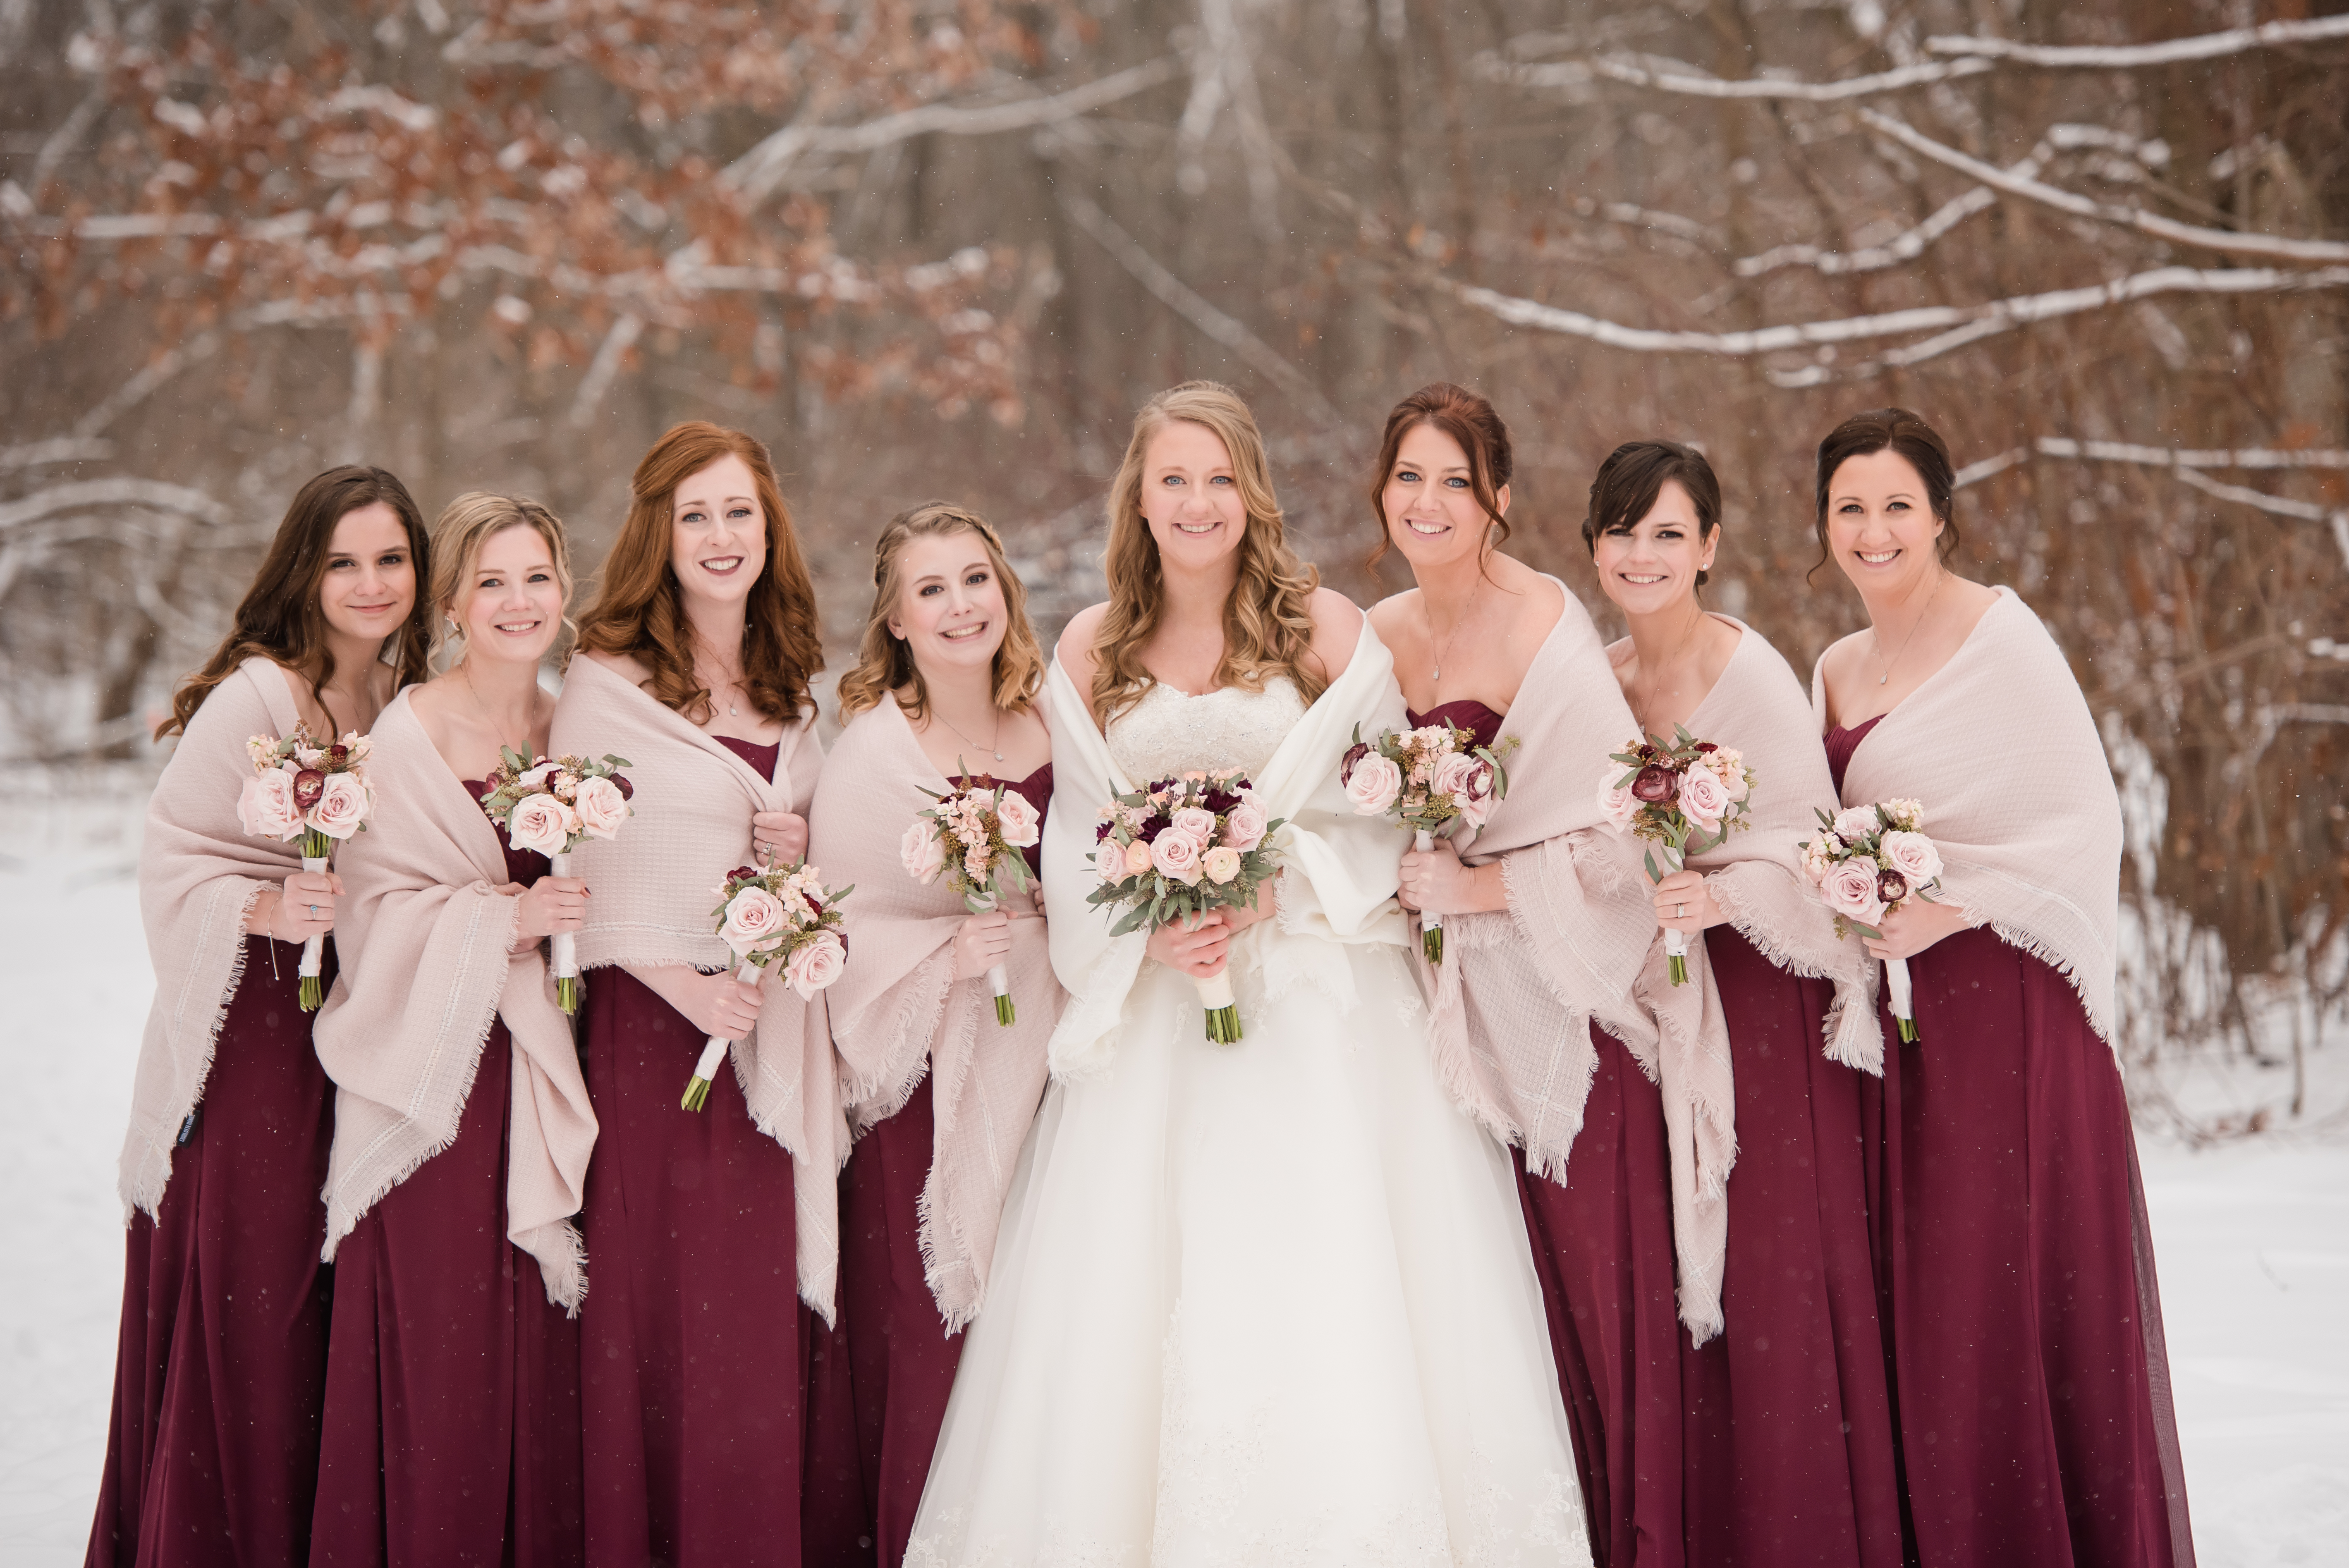 Winter wedding in Illinois with snow falling